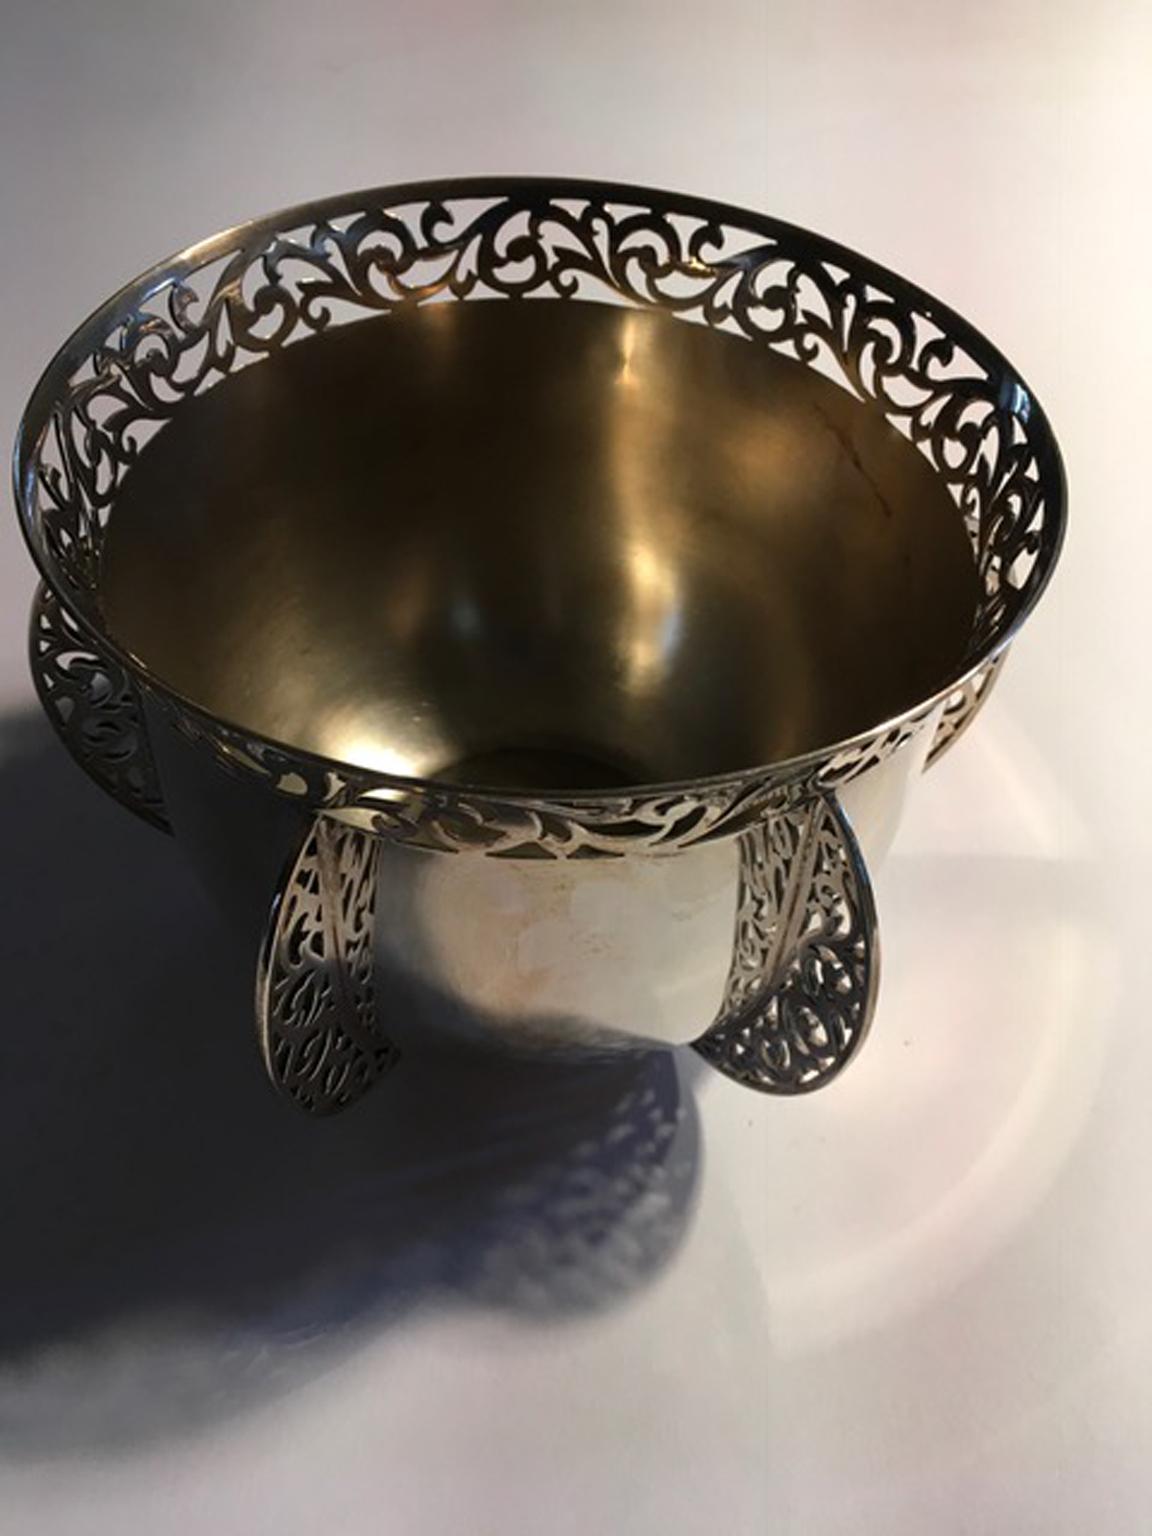 London early 20th century sterling silver bowl by Goldsmiths & Silversmiths

This elegant bowl has a finely floral carved drawn made by the London jewelers. 
A piece of timeless beauty to collect.

Fully marked.
With certificate of Authenticity.
 